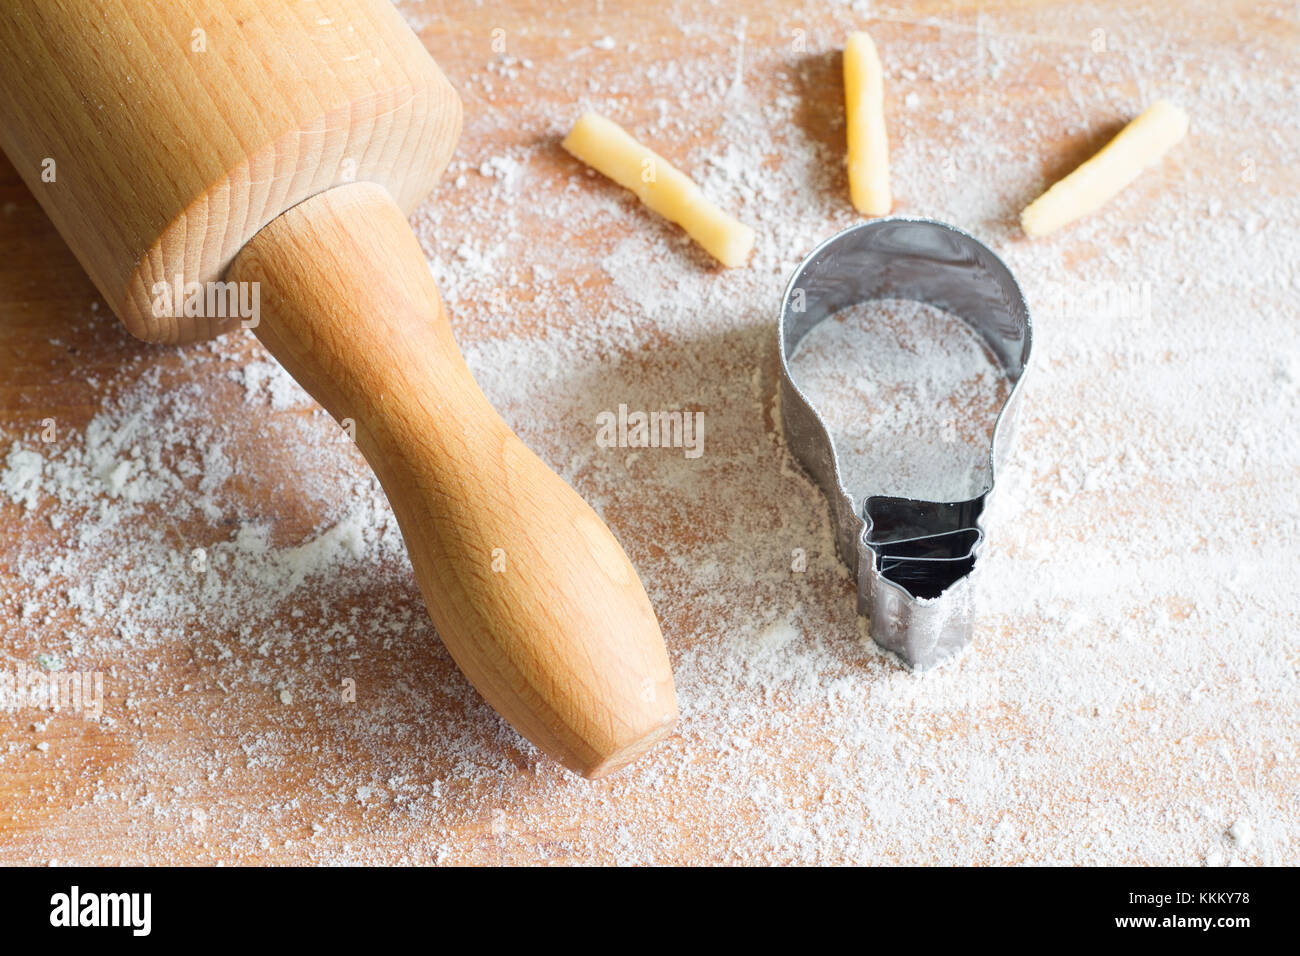 Food inspiration in the kitchen idea concept with cookie bulb Stock Photo